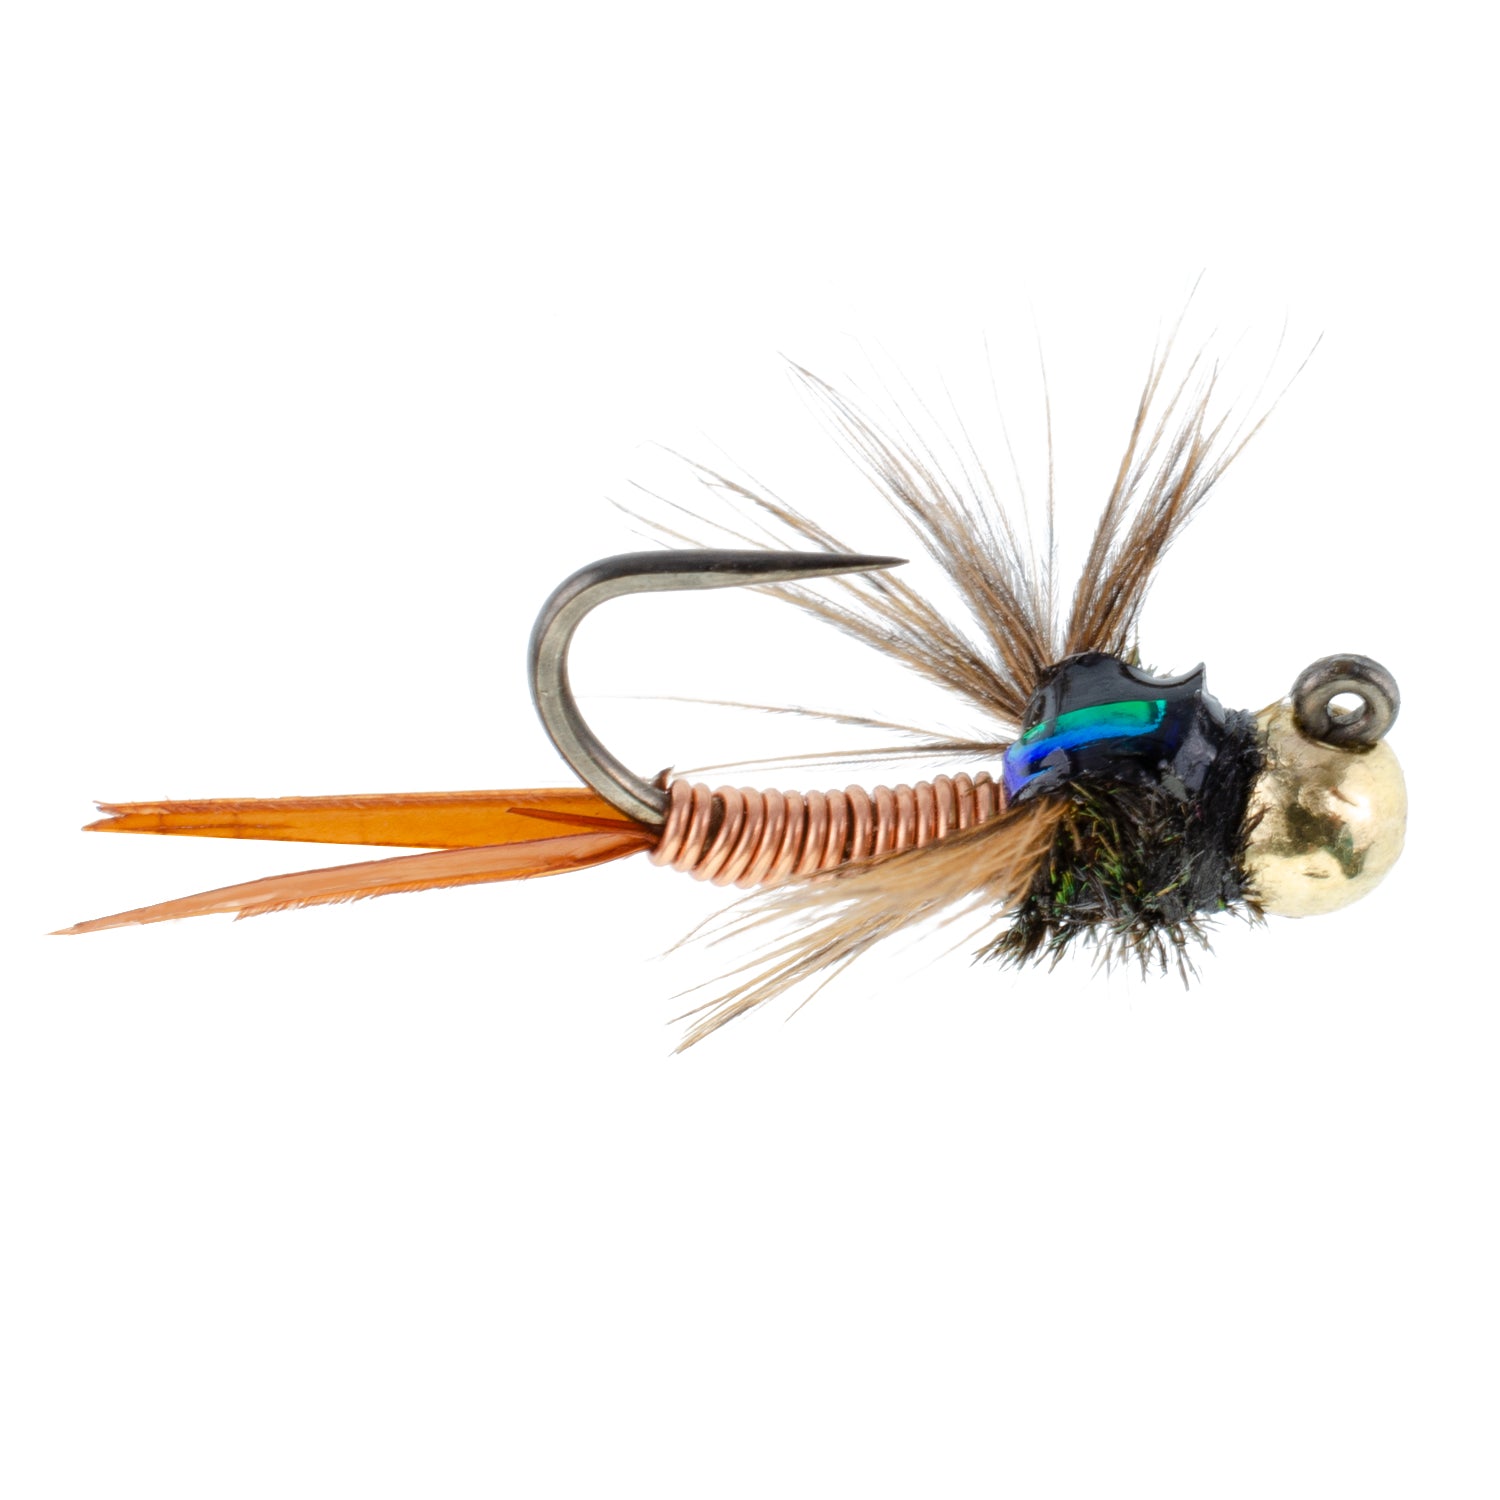 Tactical Tungsten Bead Head Copper John Euro Nymph Assortment Fly Fishing Flies - Collection of 9 Flies 3 Colors Hook Size 16